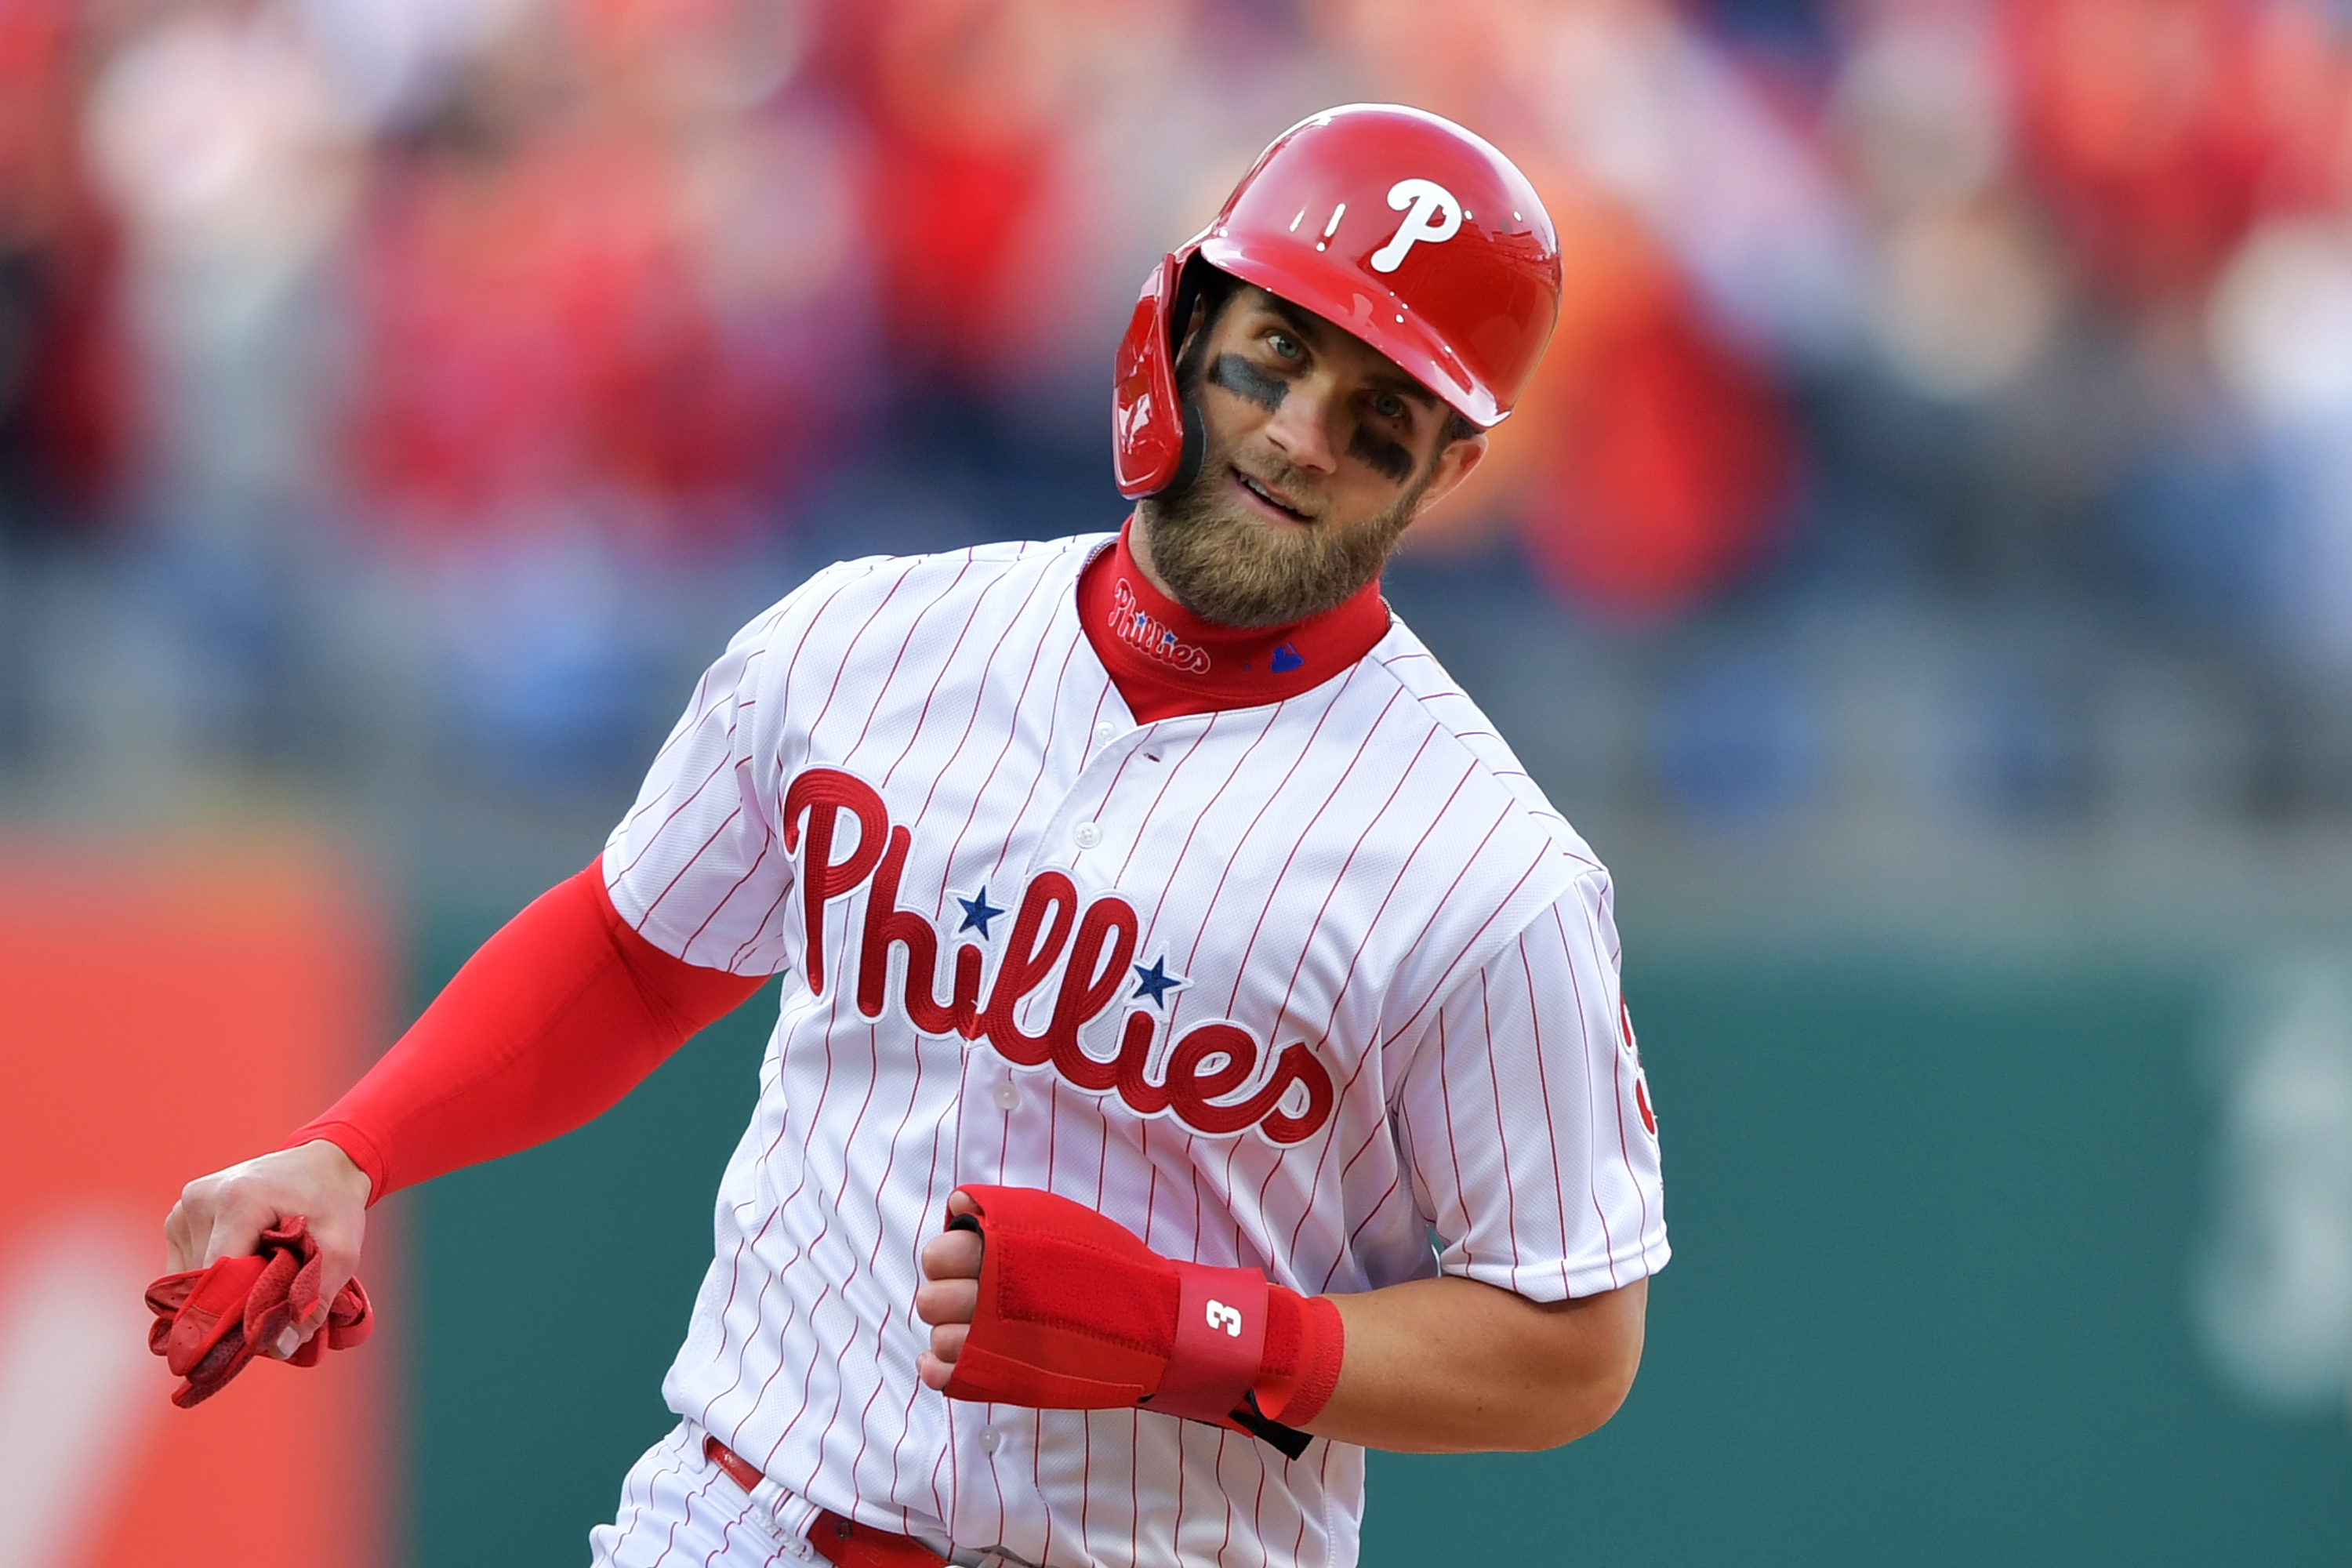 Phillies star Bryce Harper makes catch tumbling into photo pit in first  career start at first base – KGET 17